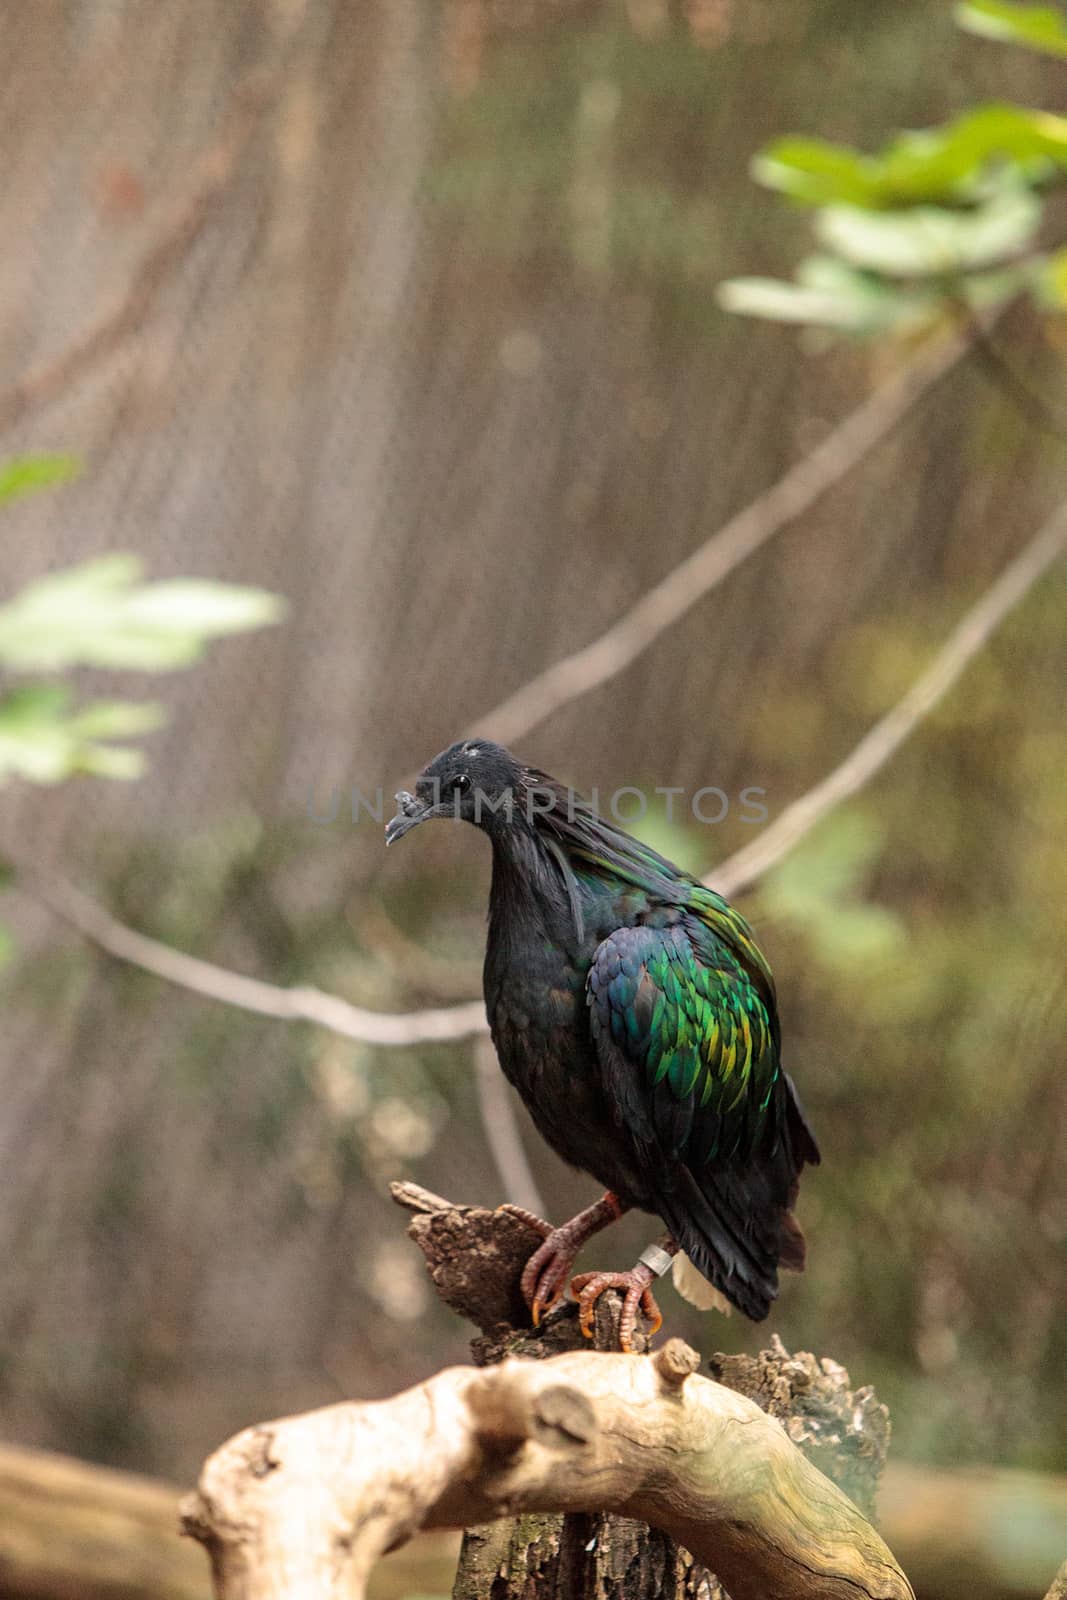 Nicobar pigeon called Caloenas nicobarica is found in New Guinea, Nicobar and Luzon.